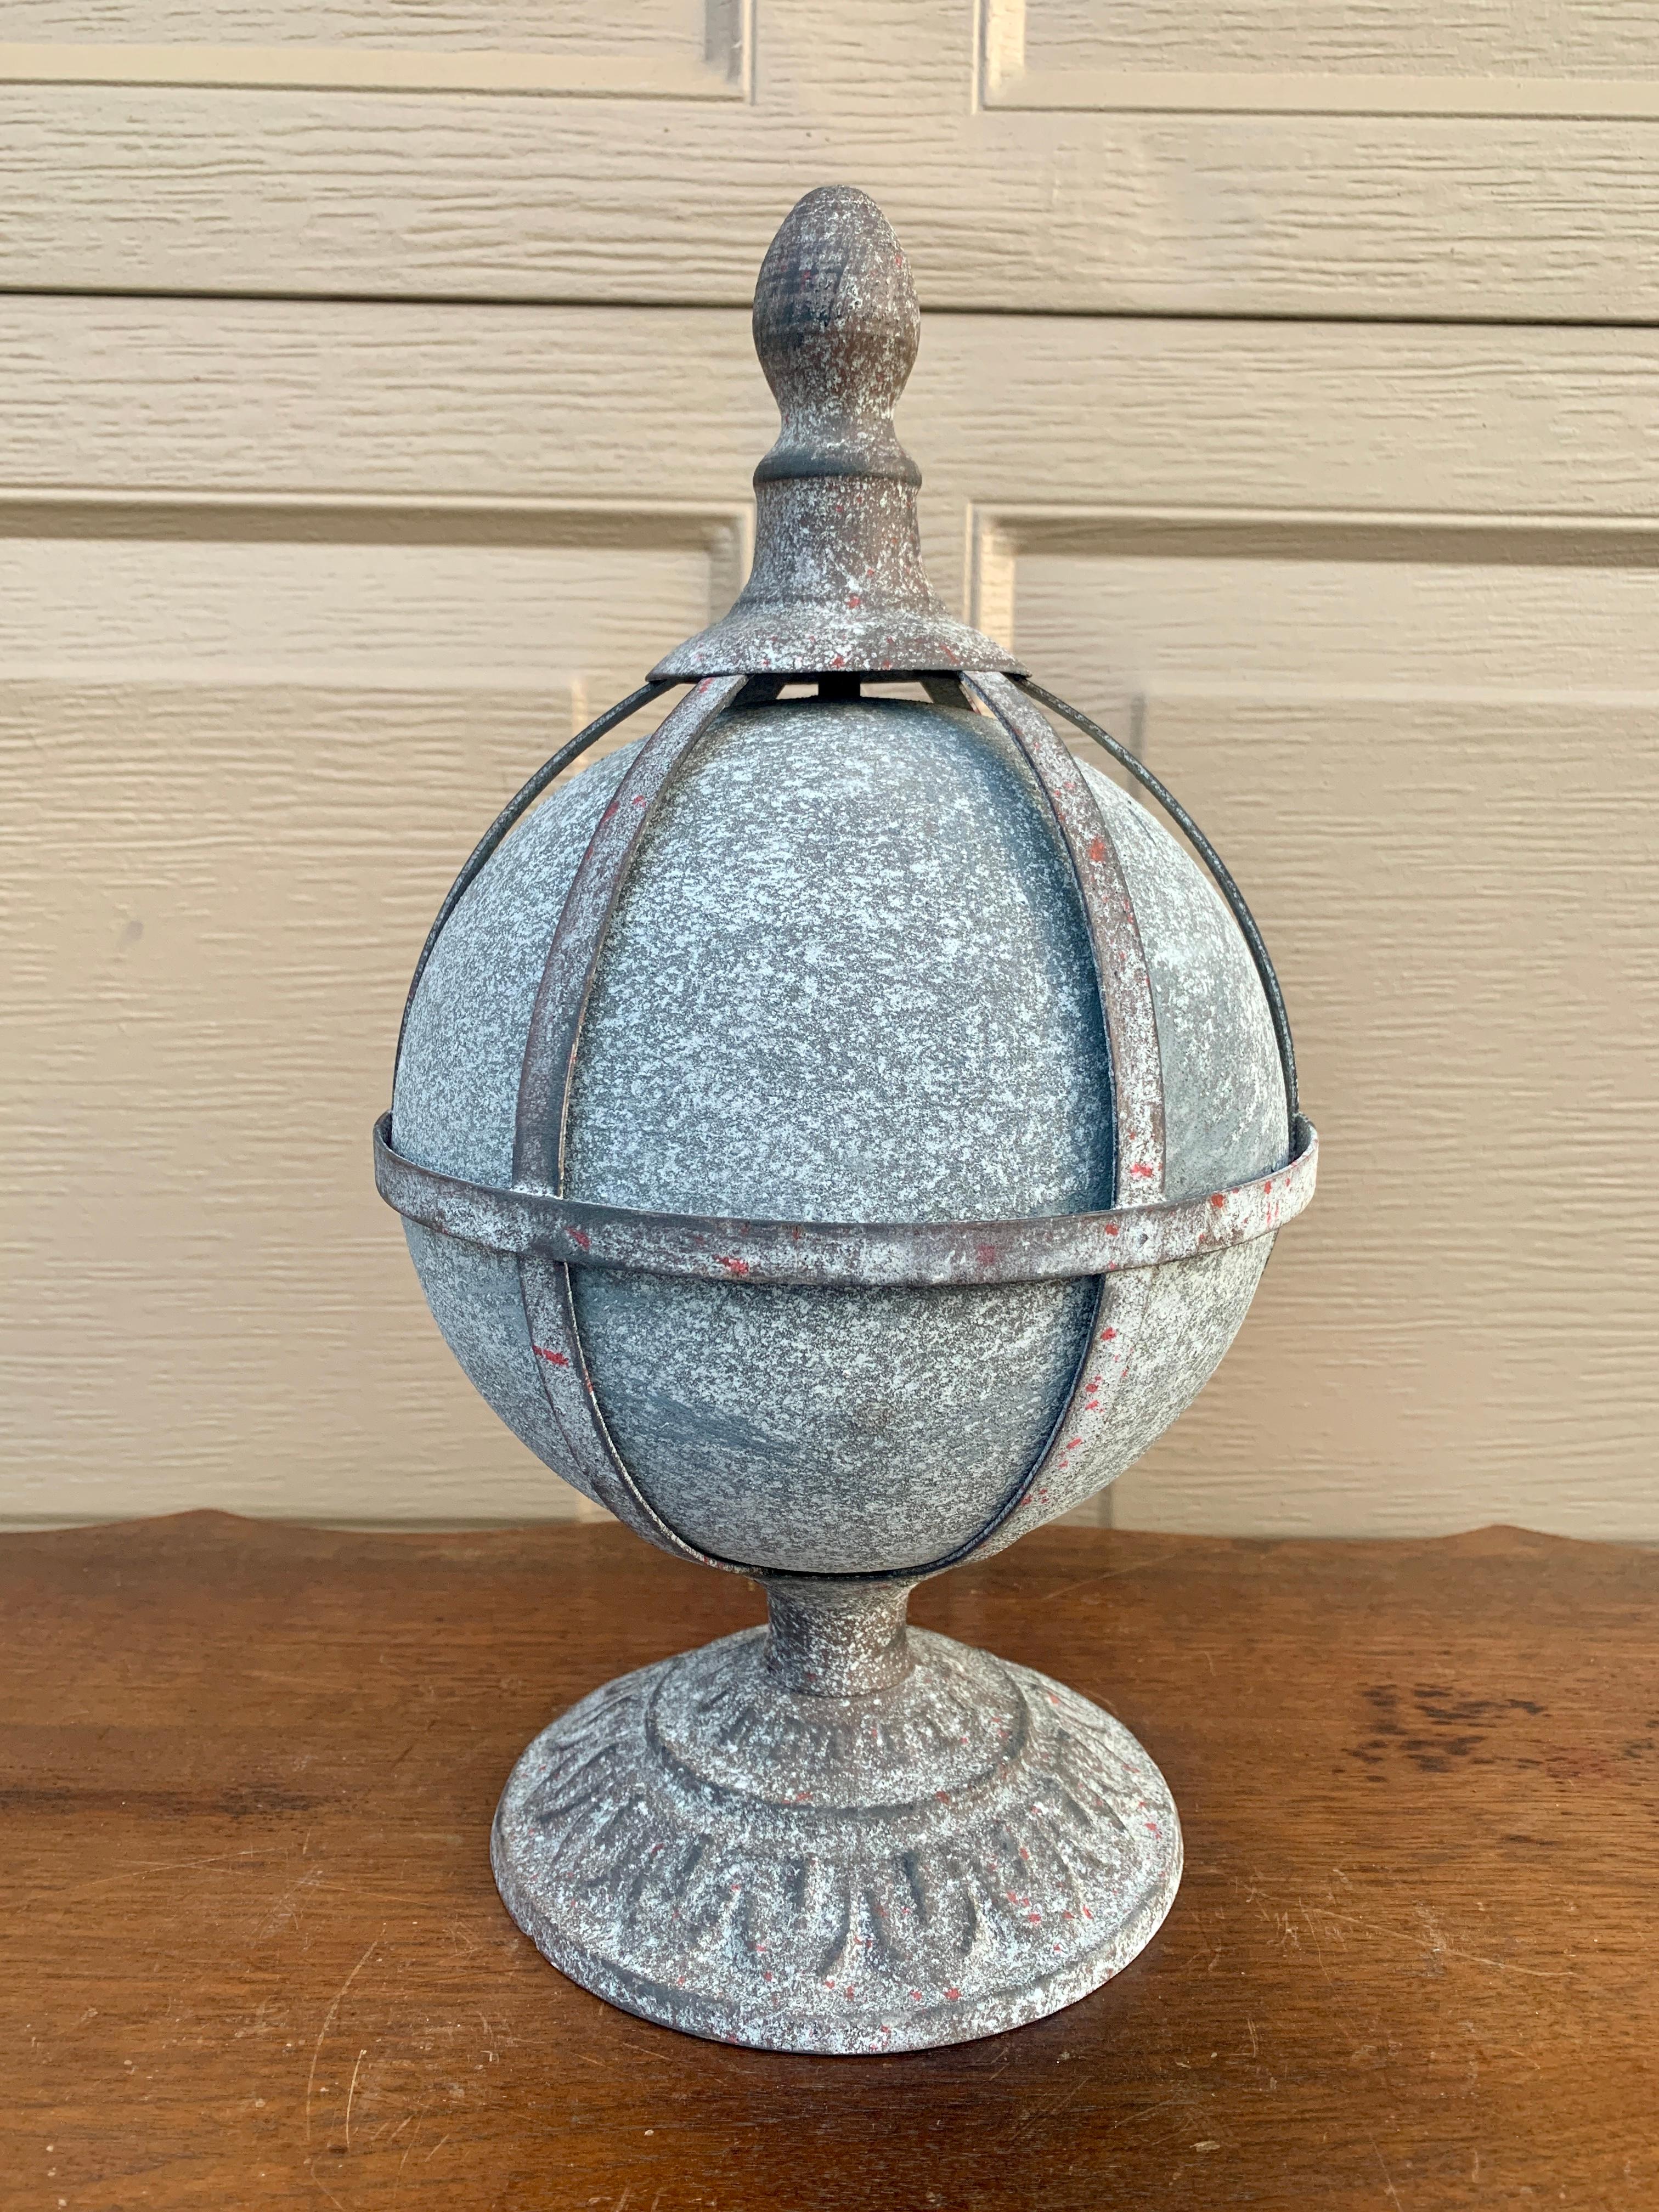 A beautiful vintage metal garden orb finial

USA, Late 20th Century

Measures: 8